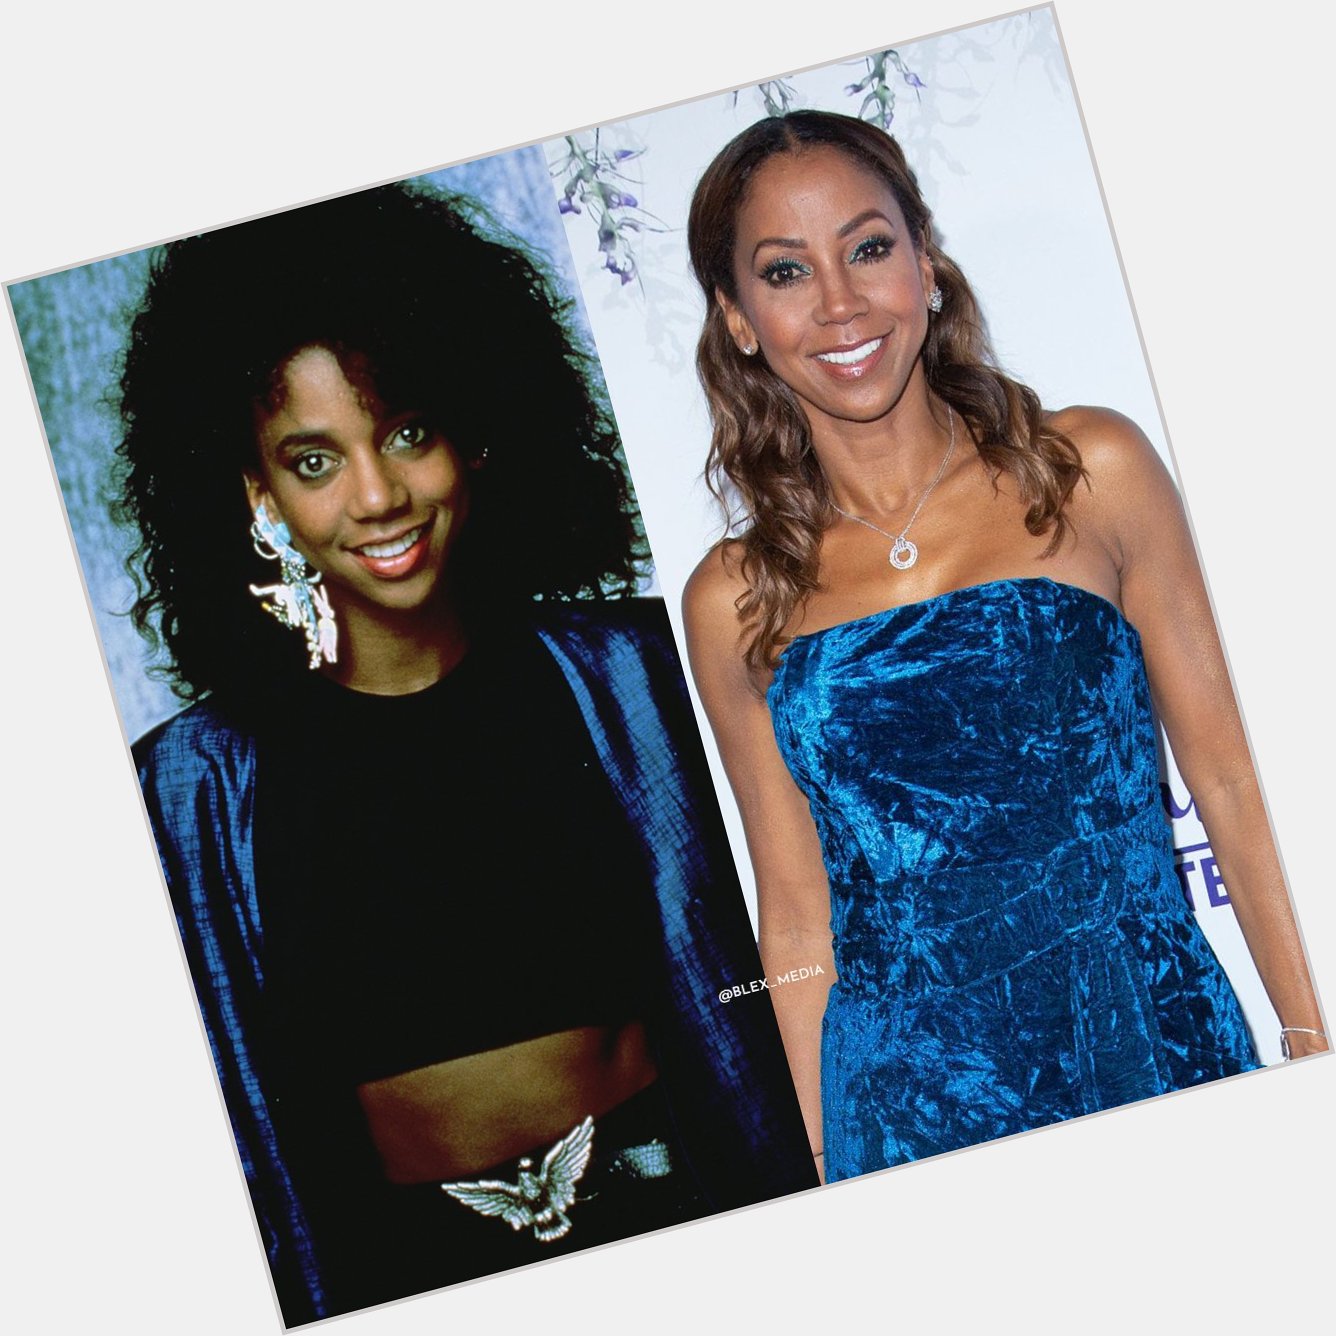 From 21 Jumpstreet to now, Happy 56th birthday Holly Robinson Peete ( 